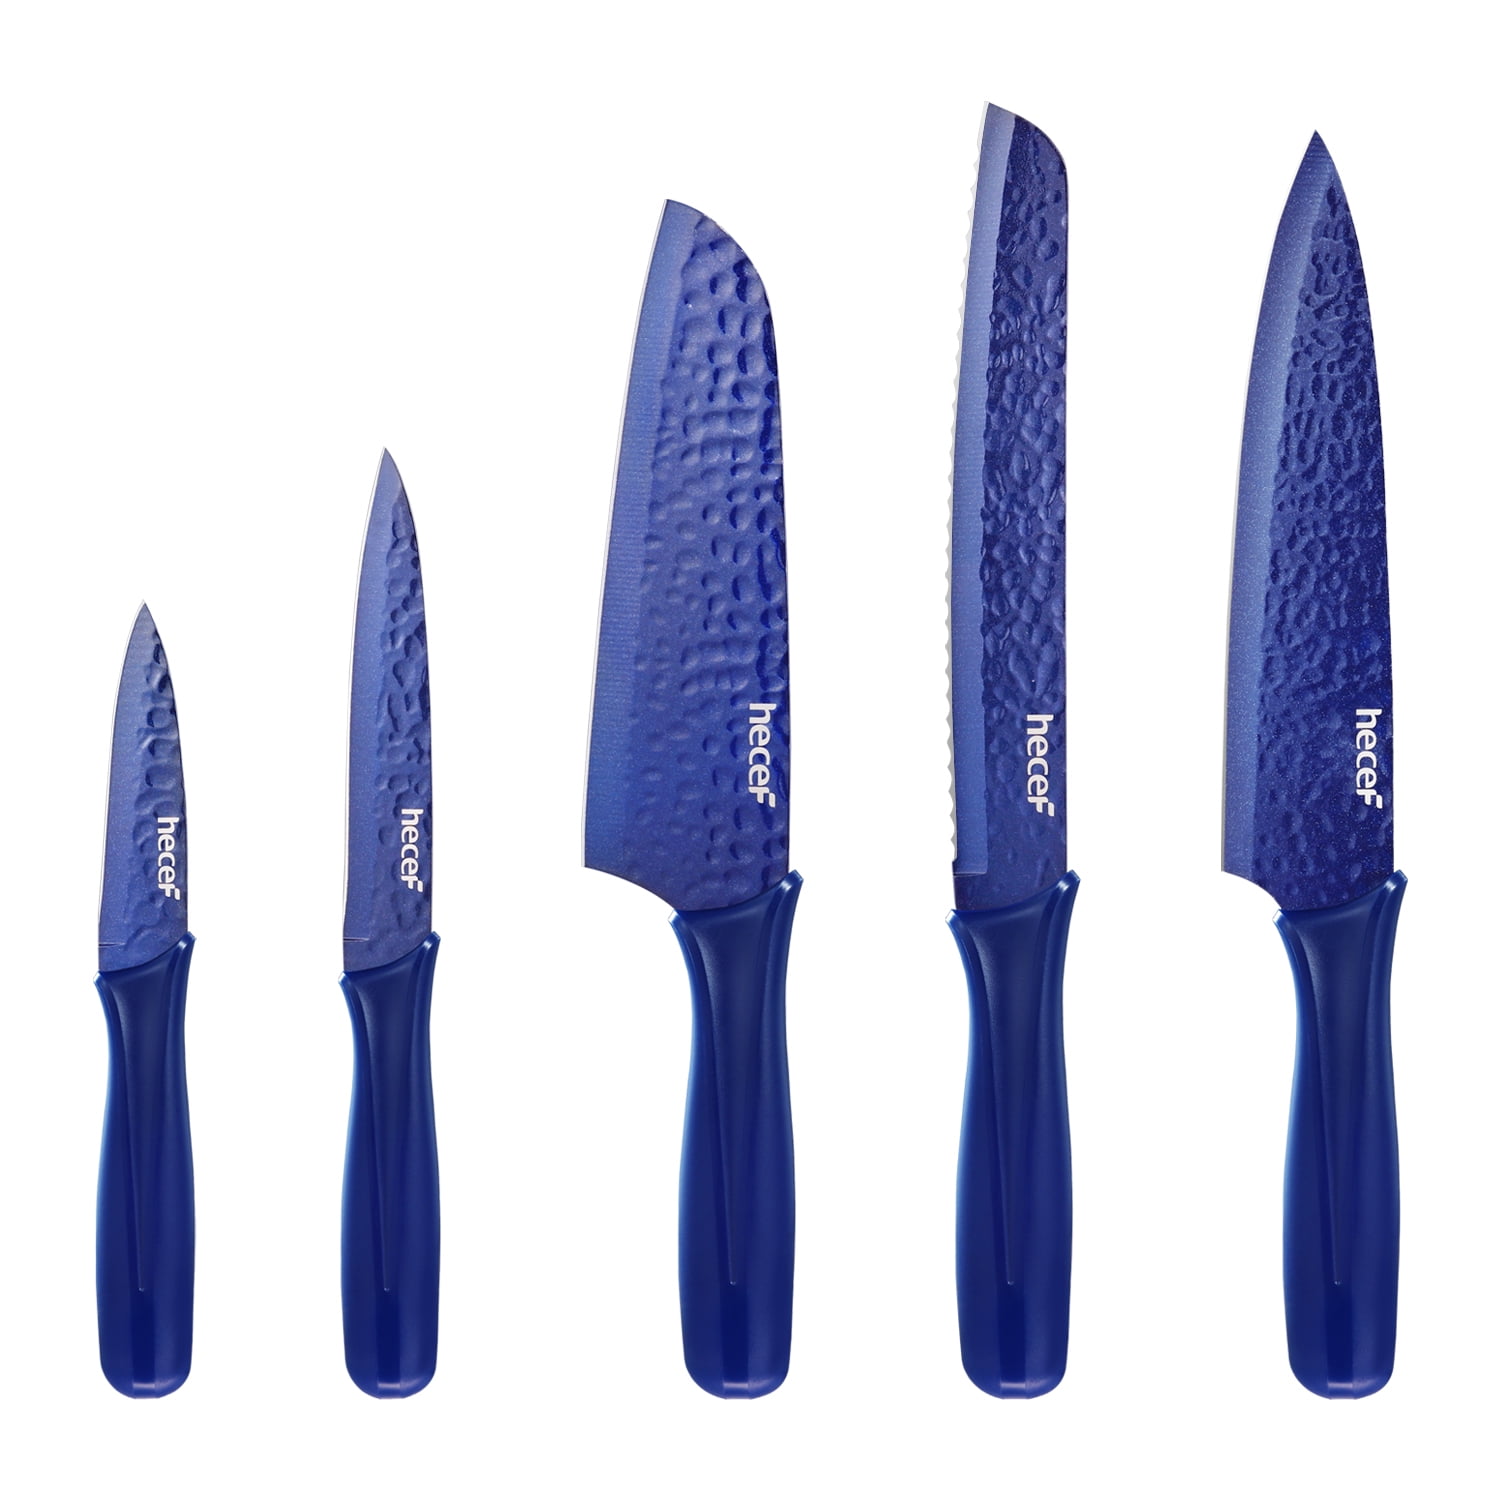 Hecef 10-Piece Kitchen Knife Set with Sheaths, Galaxy Blue Sharp Essential  Chef Cooking Knives, Hammered Blade